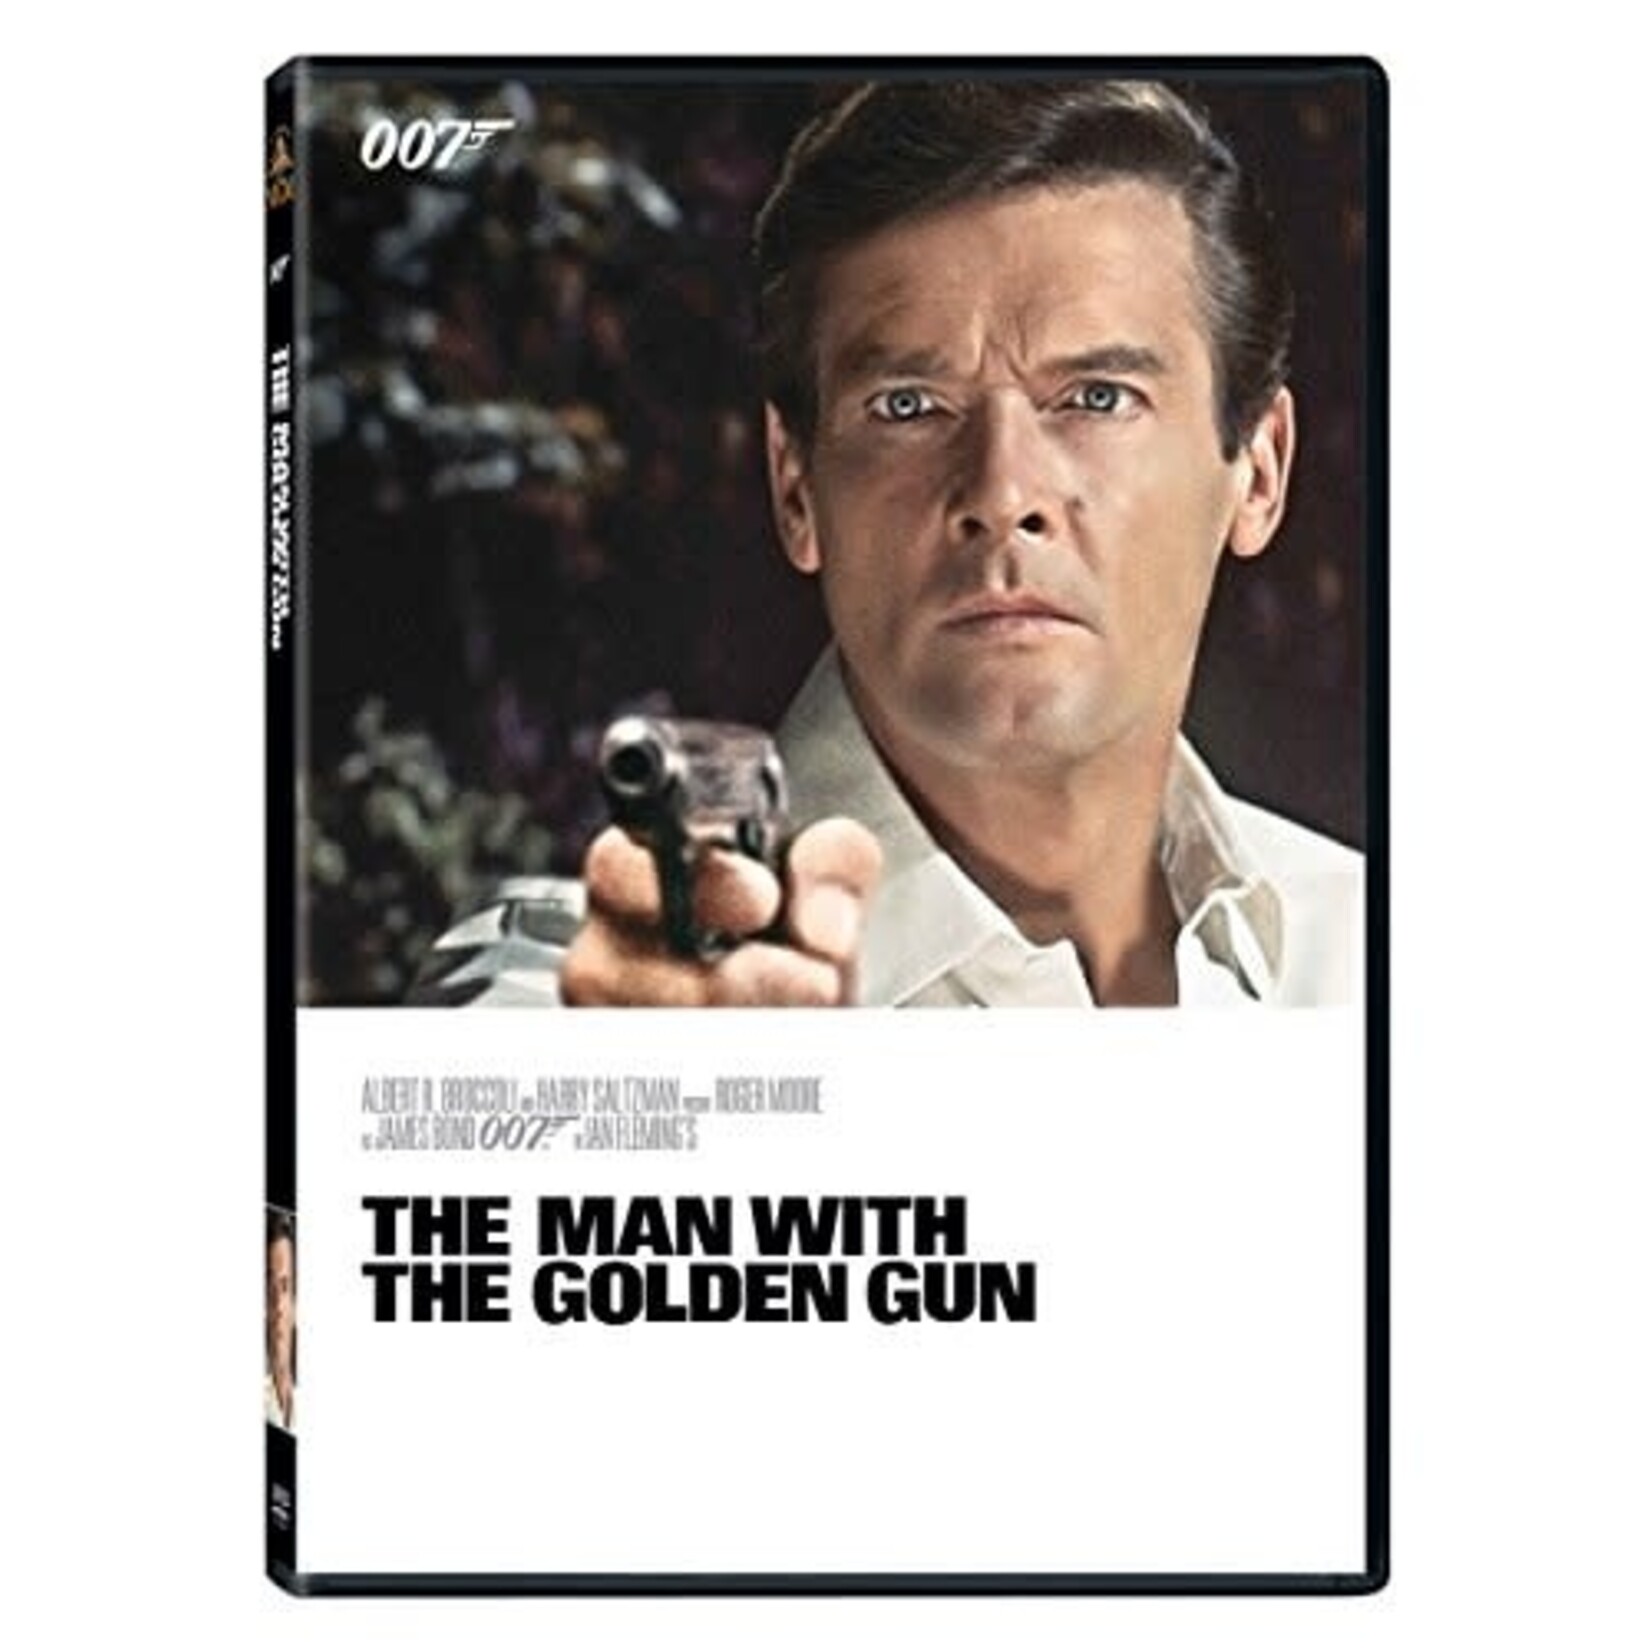 James Bond 007 - The Man With The Golden Gun (1974) [USED DVD]